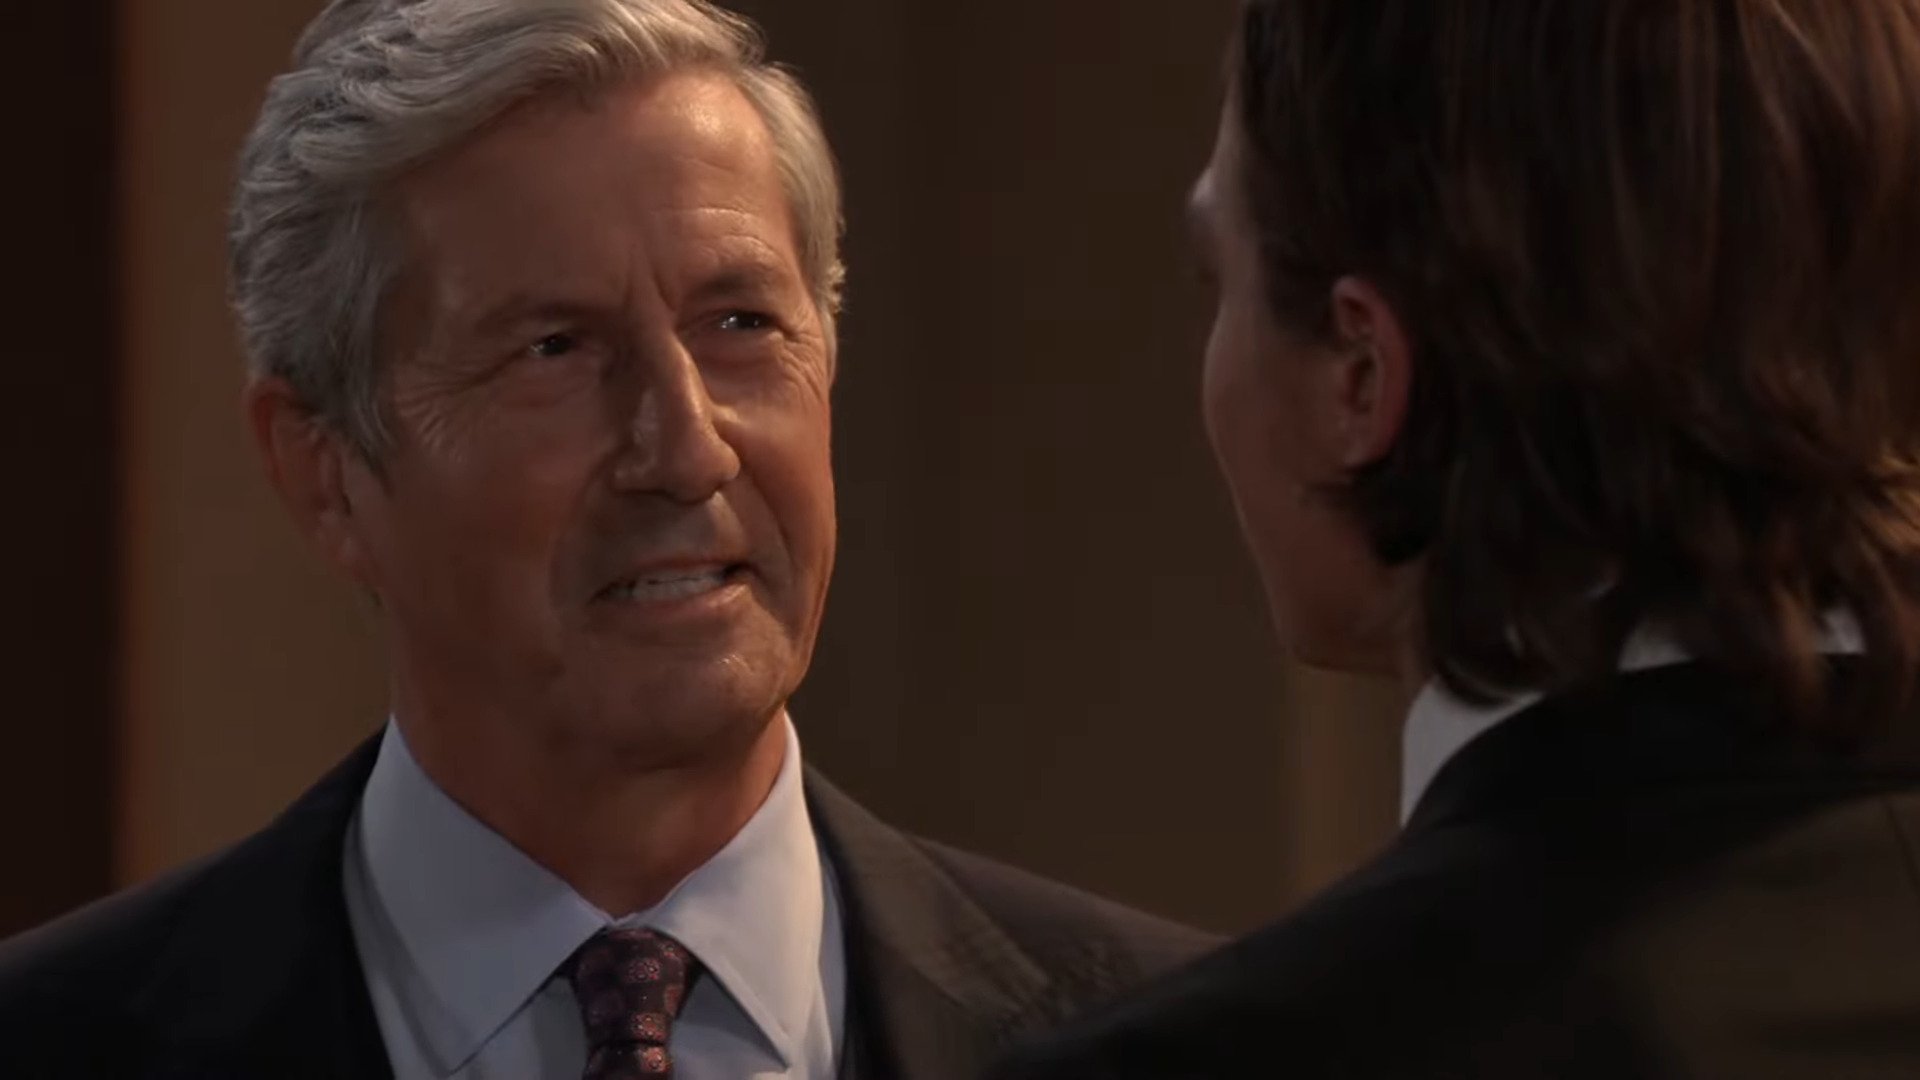 victor faith in spencer GH recaps SoapsSpoilers